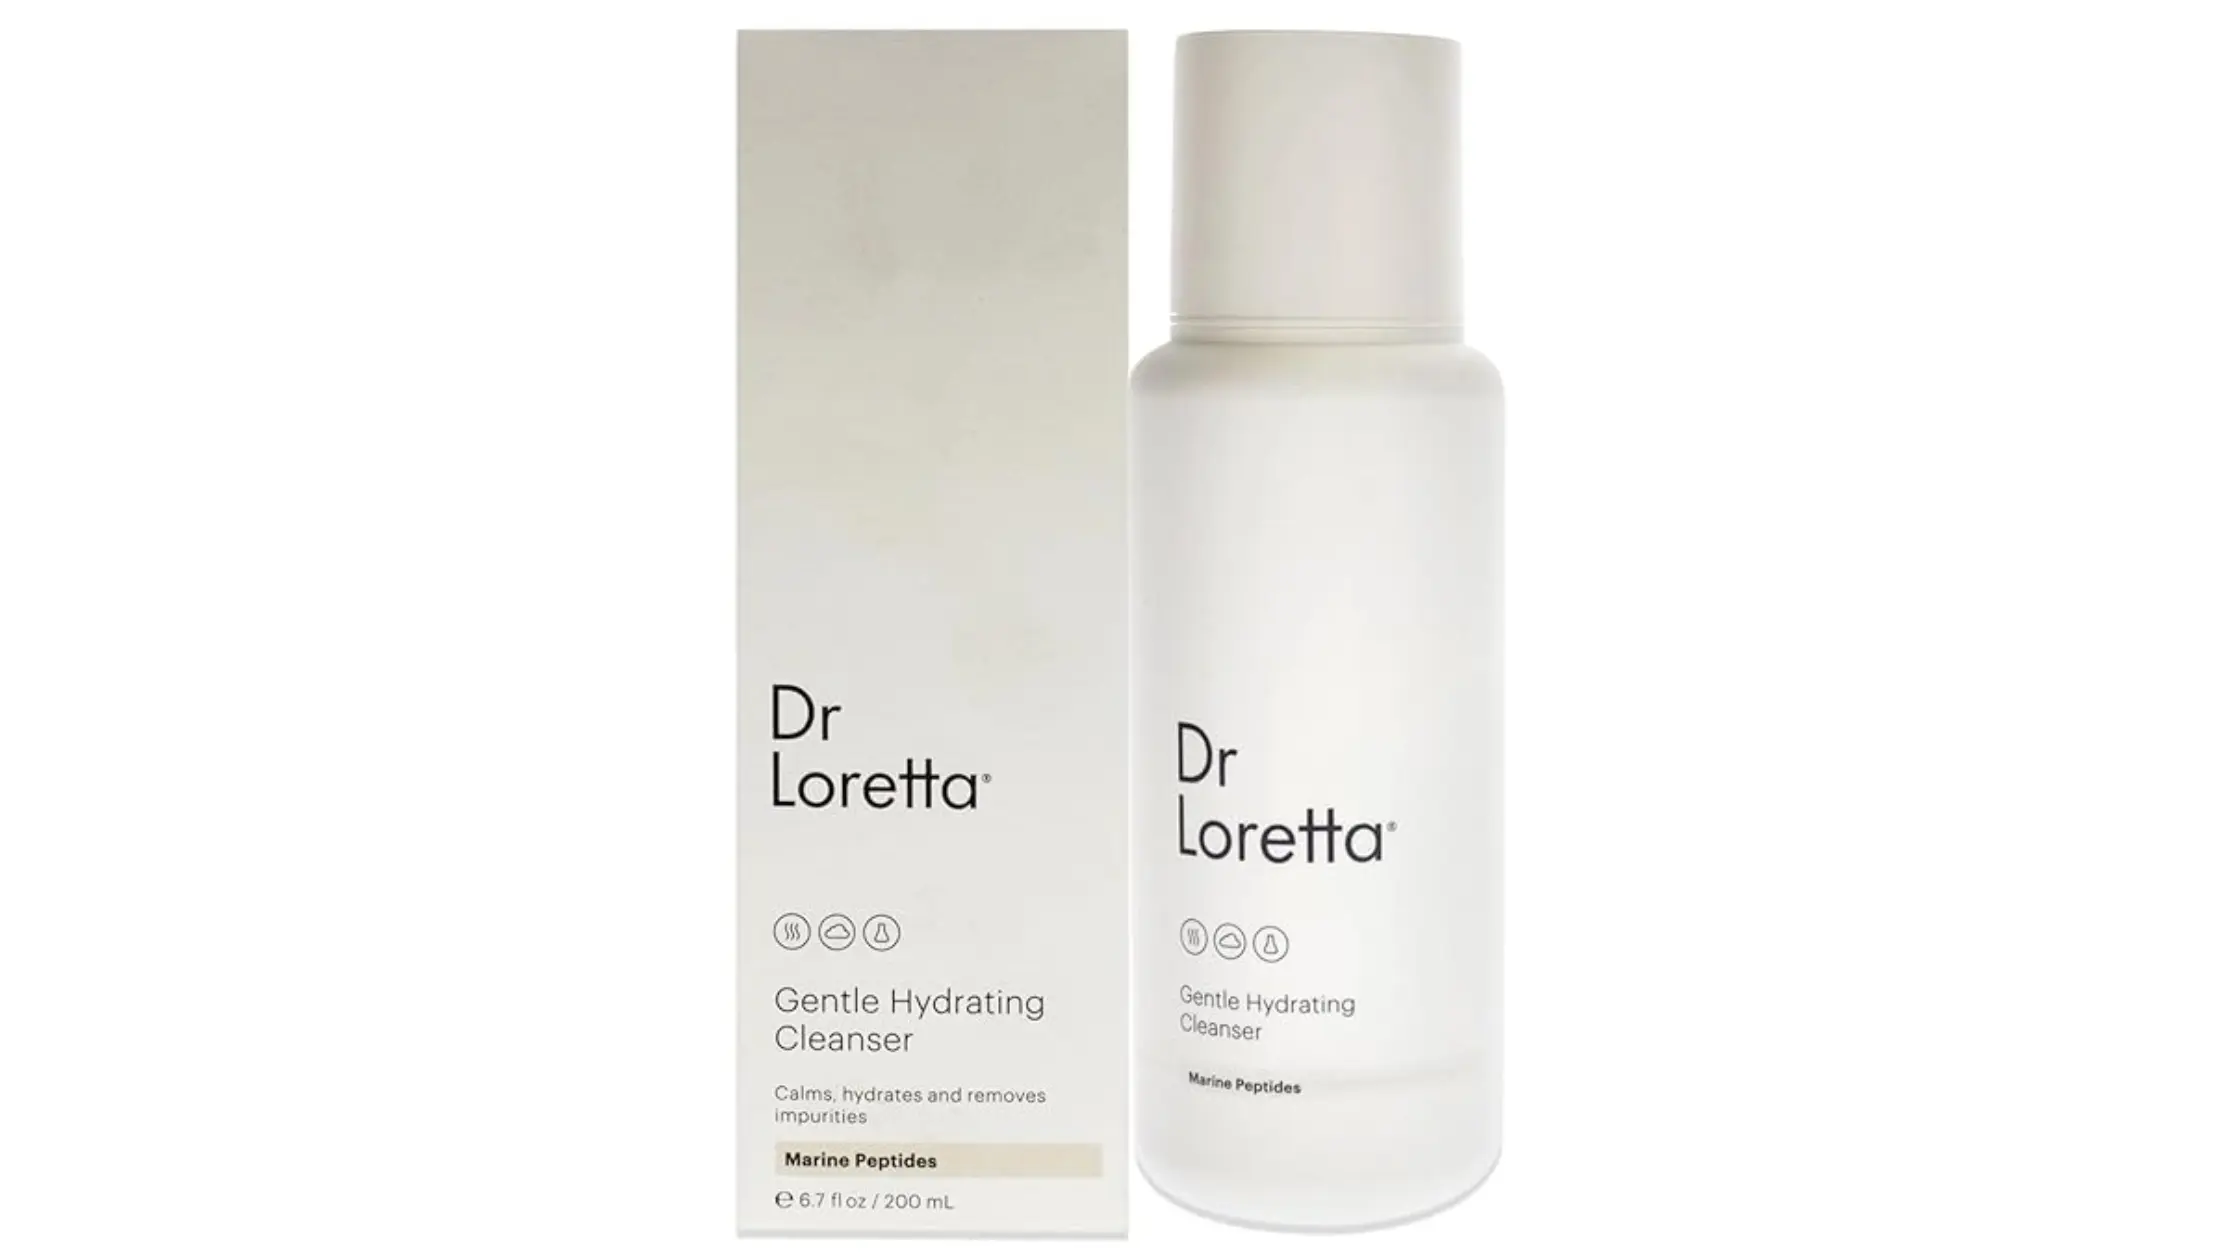 dr loretta gentle hydrating cleanser review page banner image